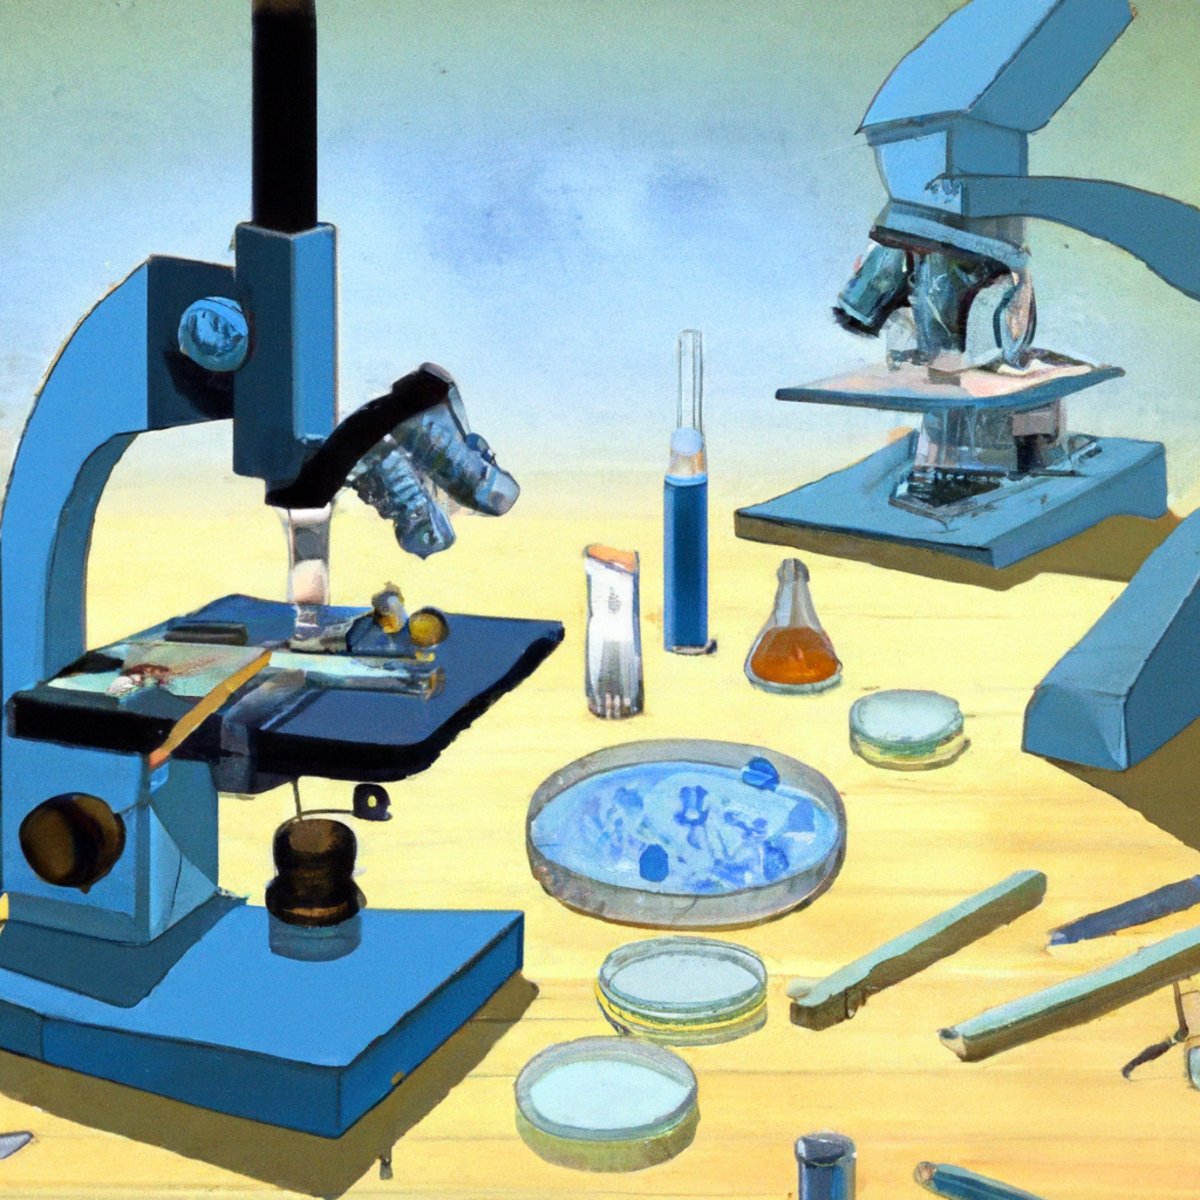 Scientific laboratory with equipment for studying Fields Syndrome and Optic Nerve Hypoplasia.